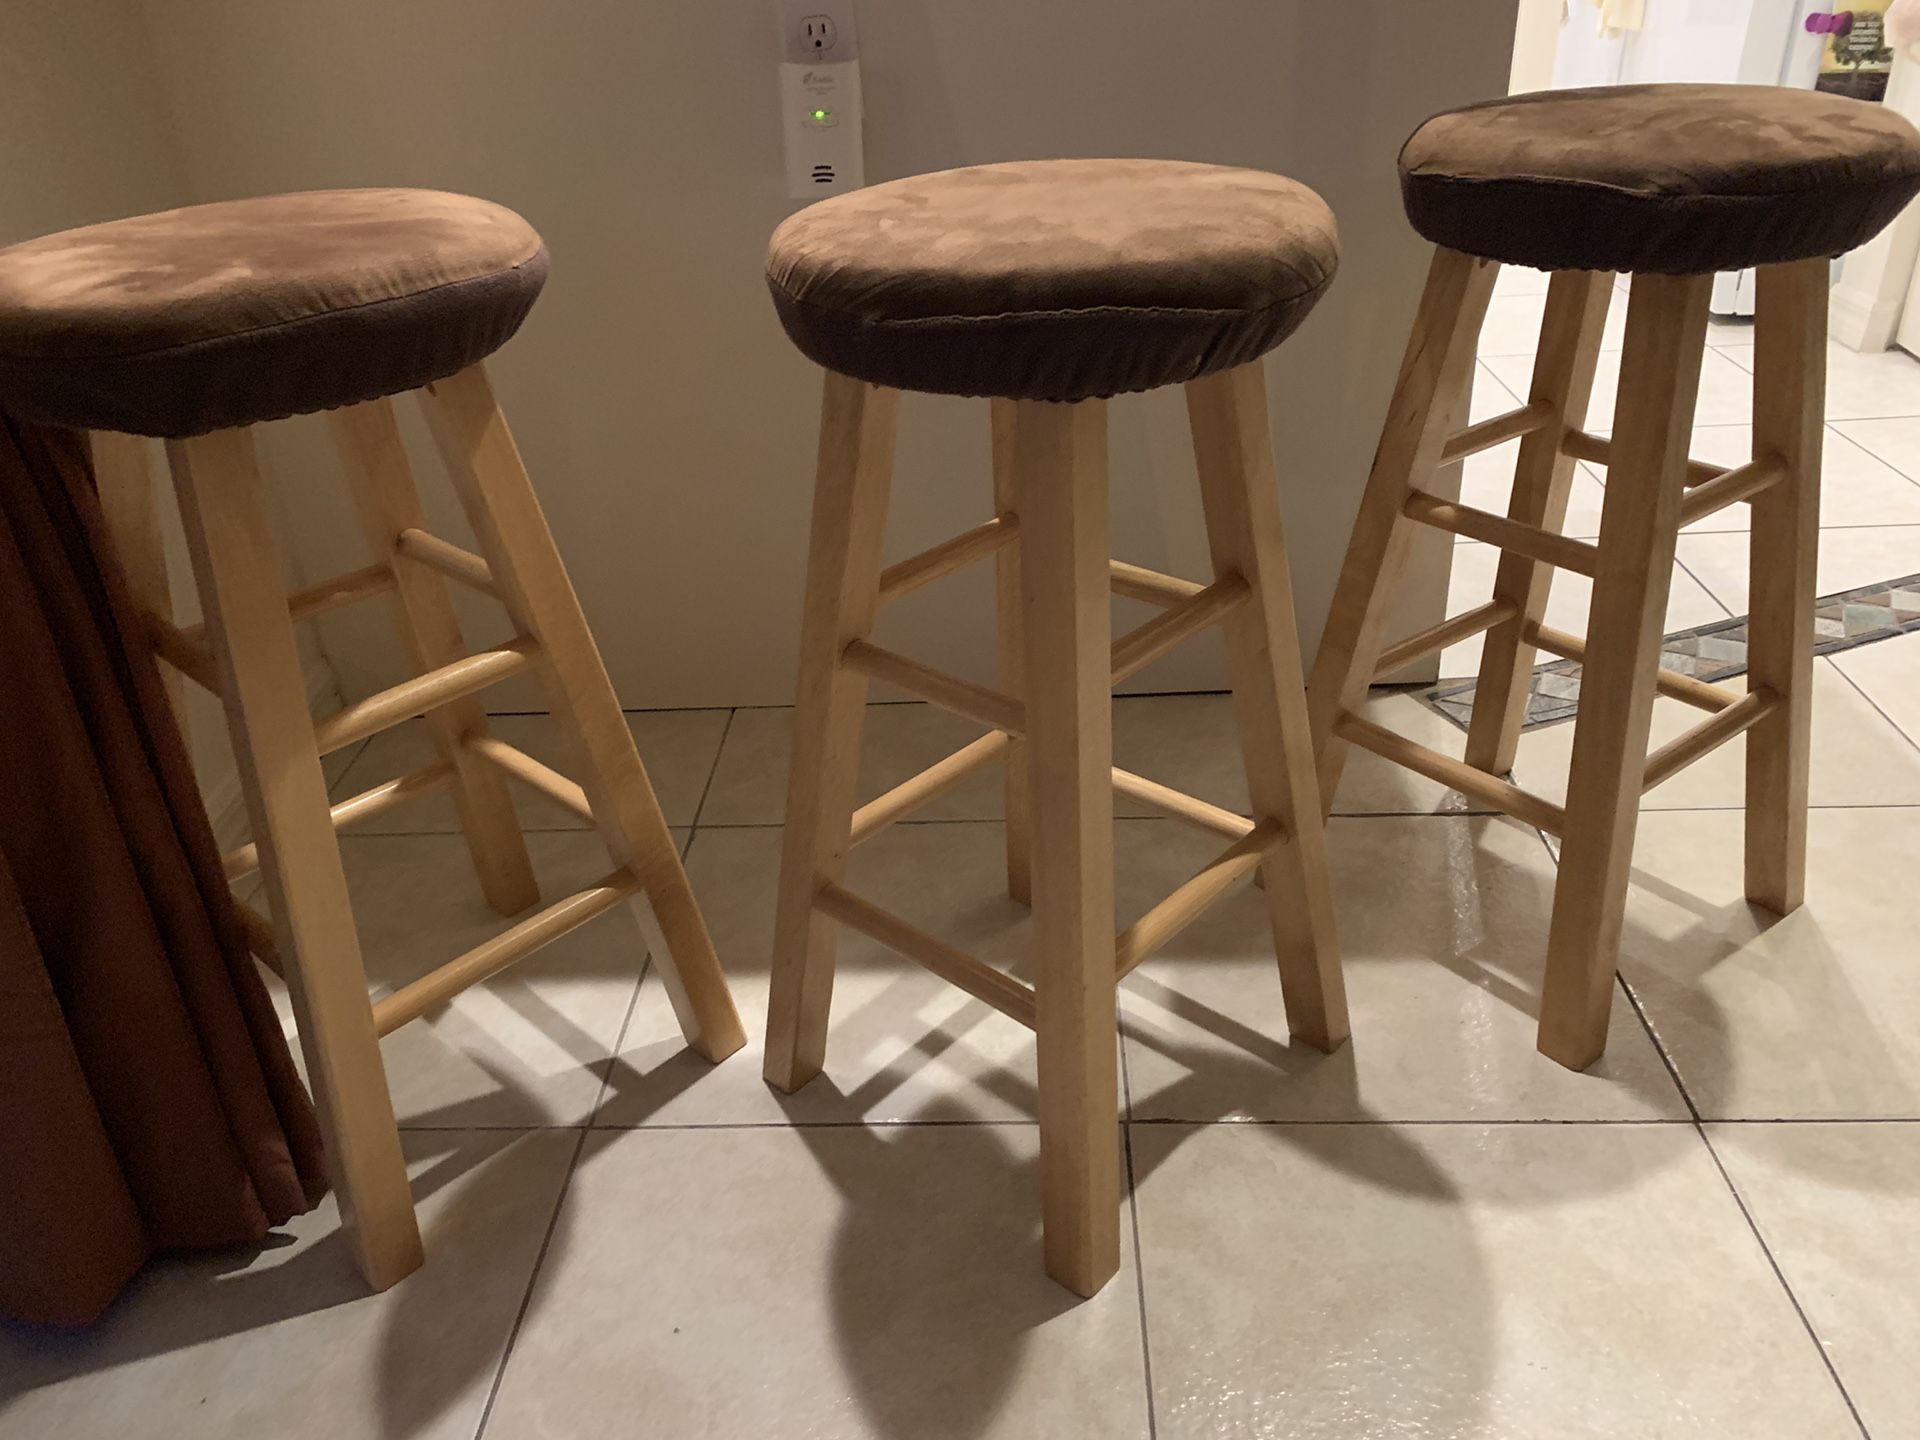 3 Bar stools with cushions